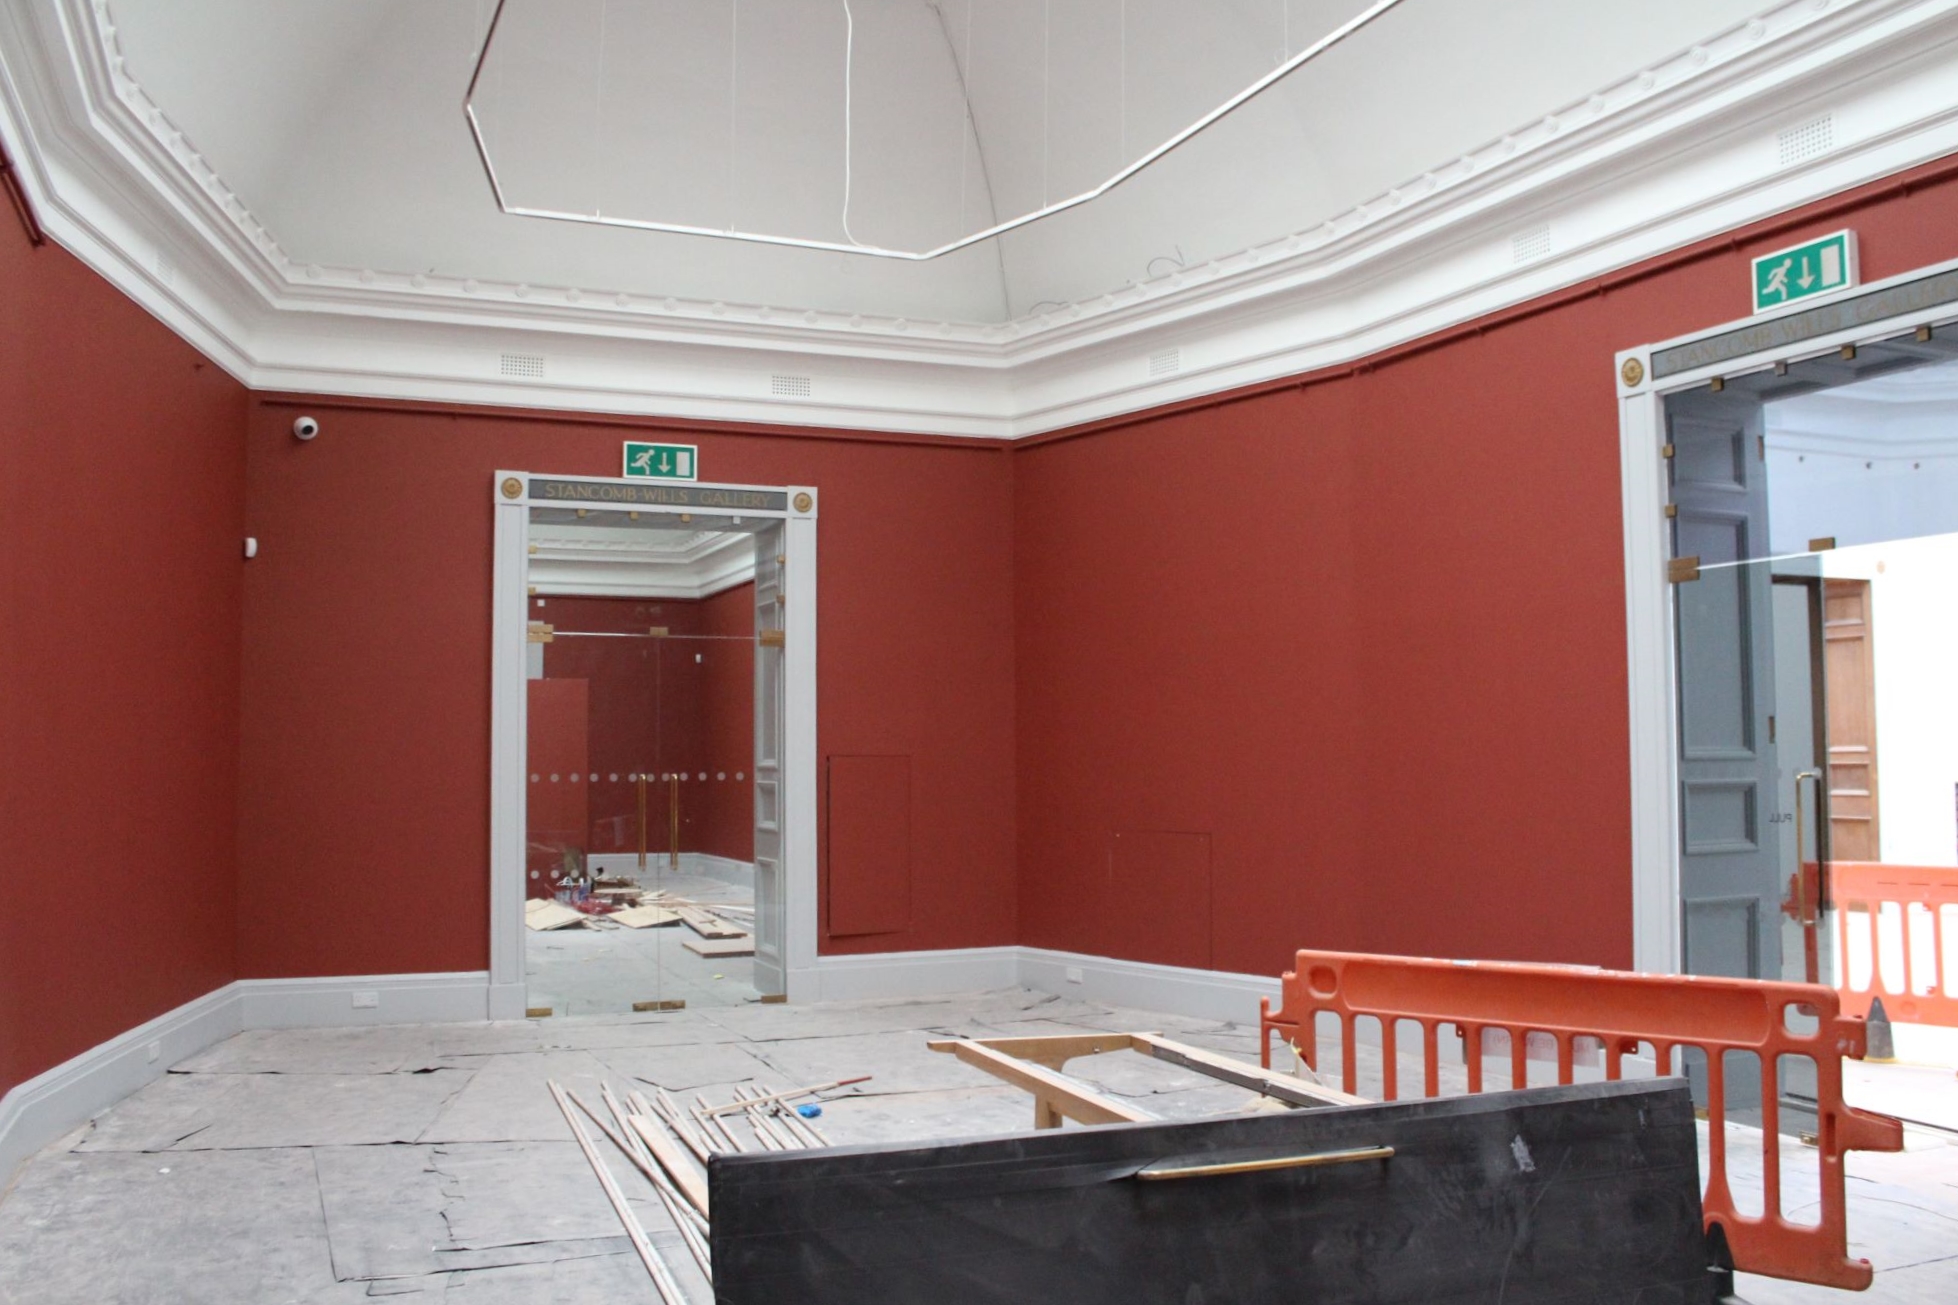 A large gallery space with red painted walls and white ceiling 